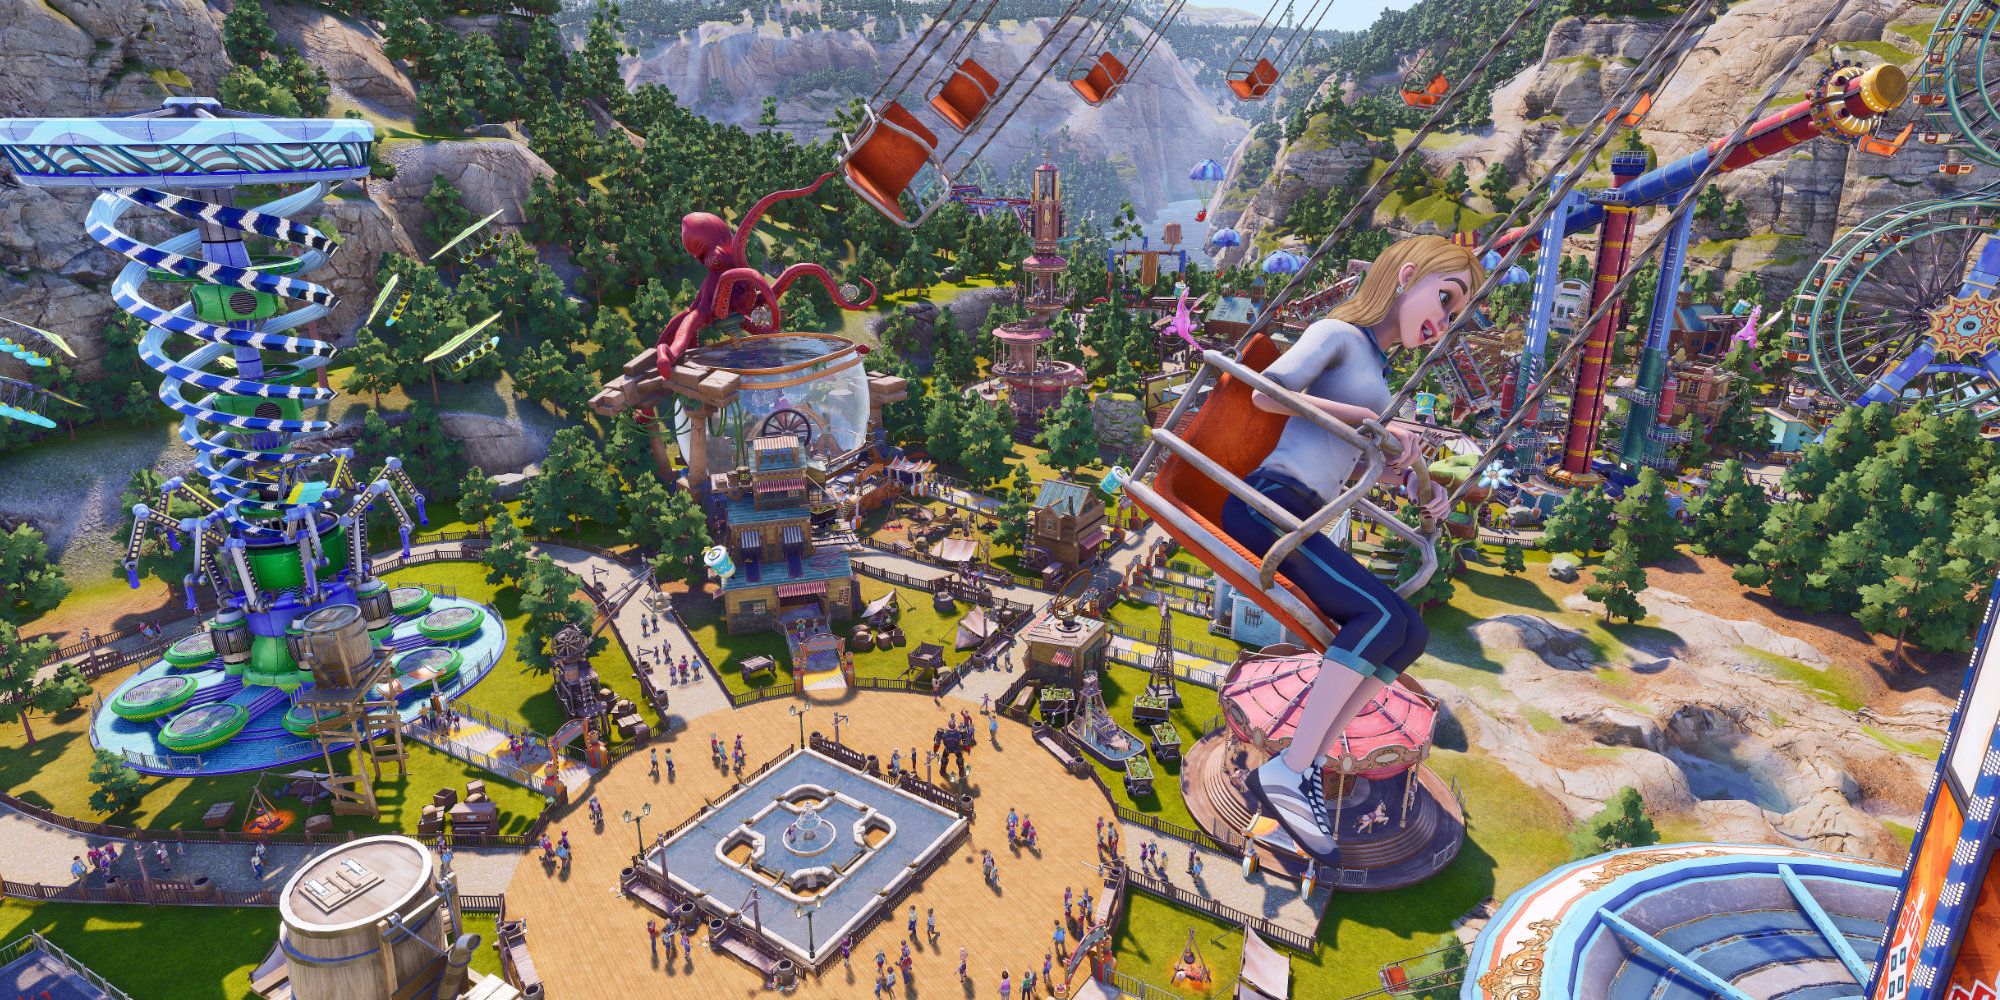 Park beyond theme park with the rides impossified